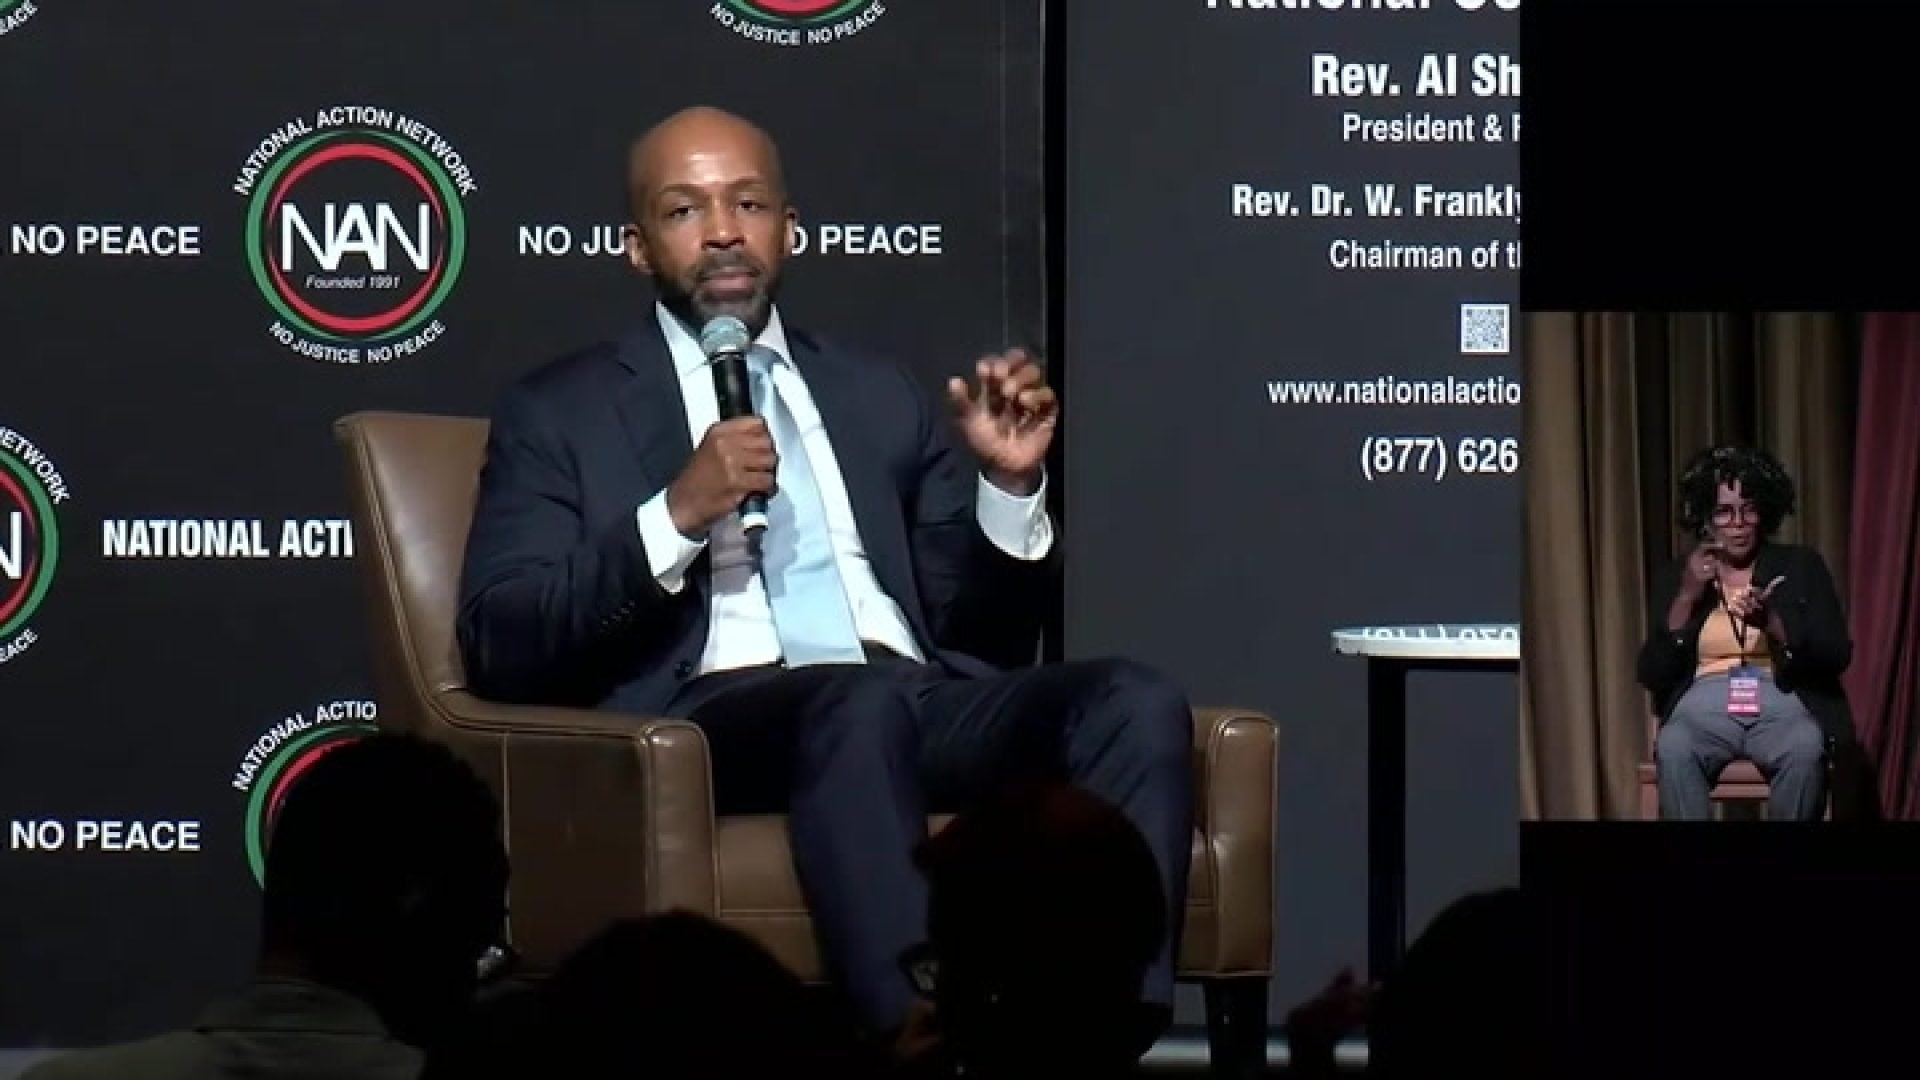 WATCH: Alphonso David Talks About Holding Companies Responsible At the National Action Network